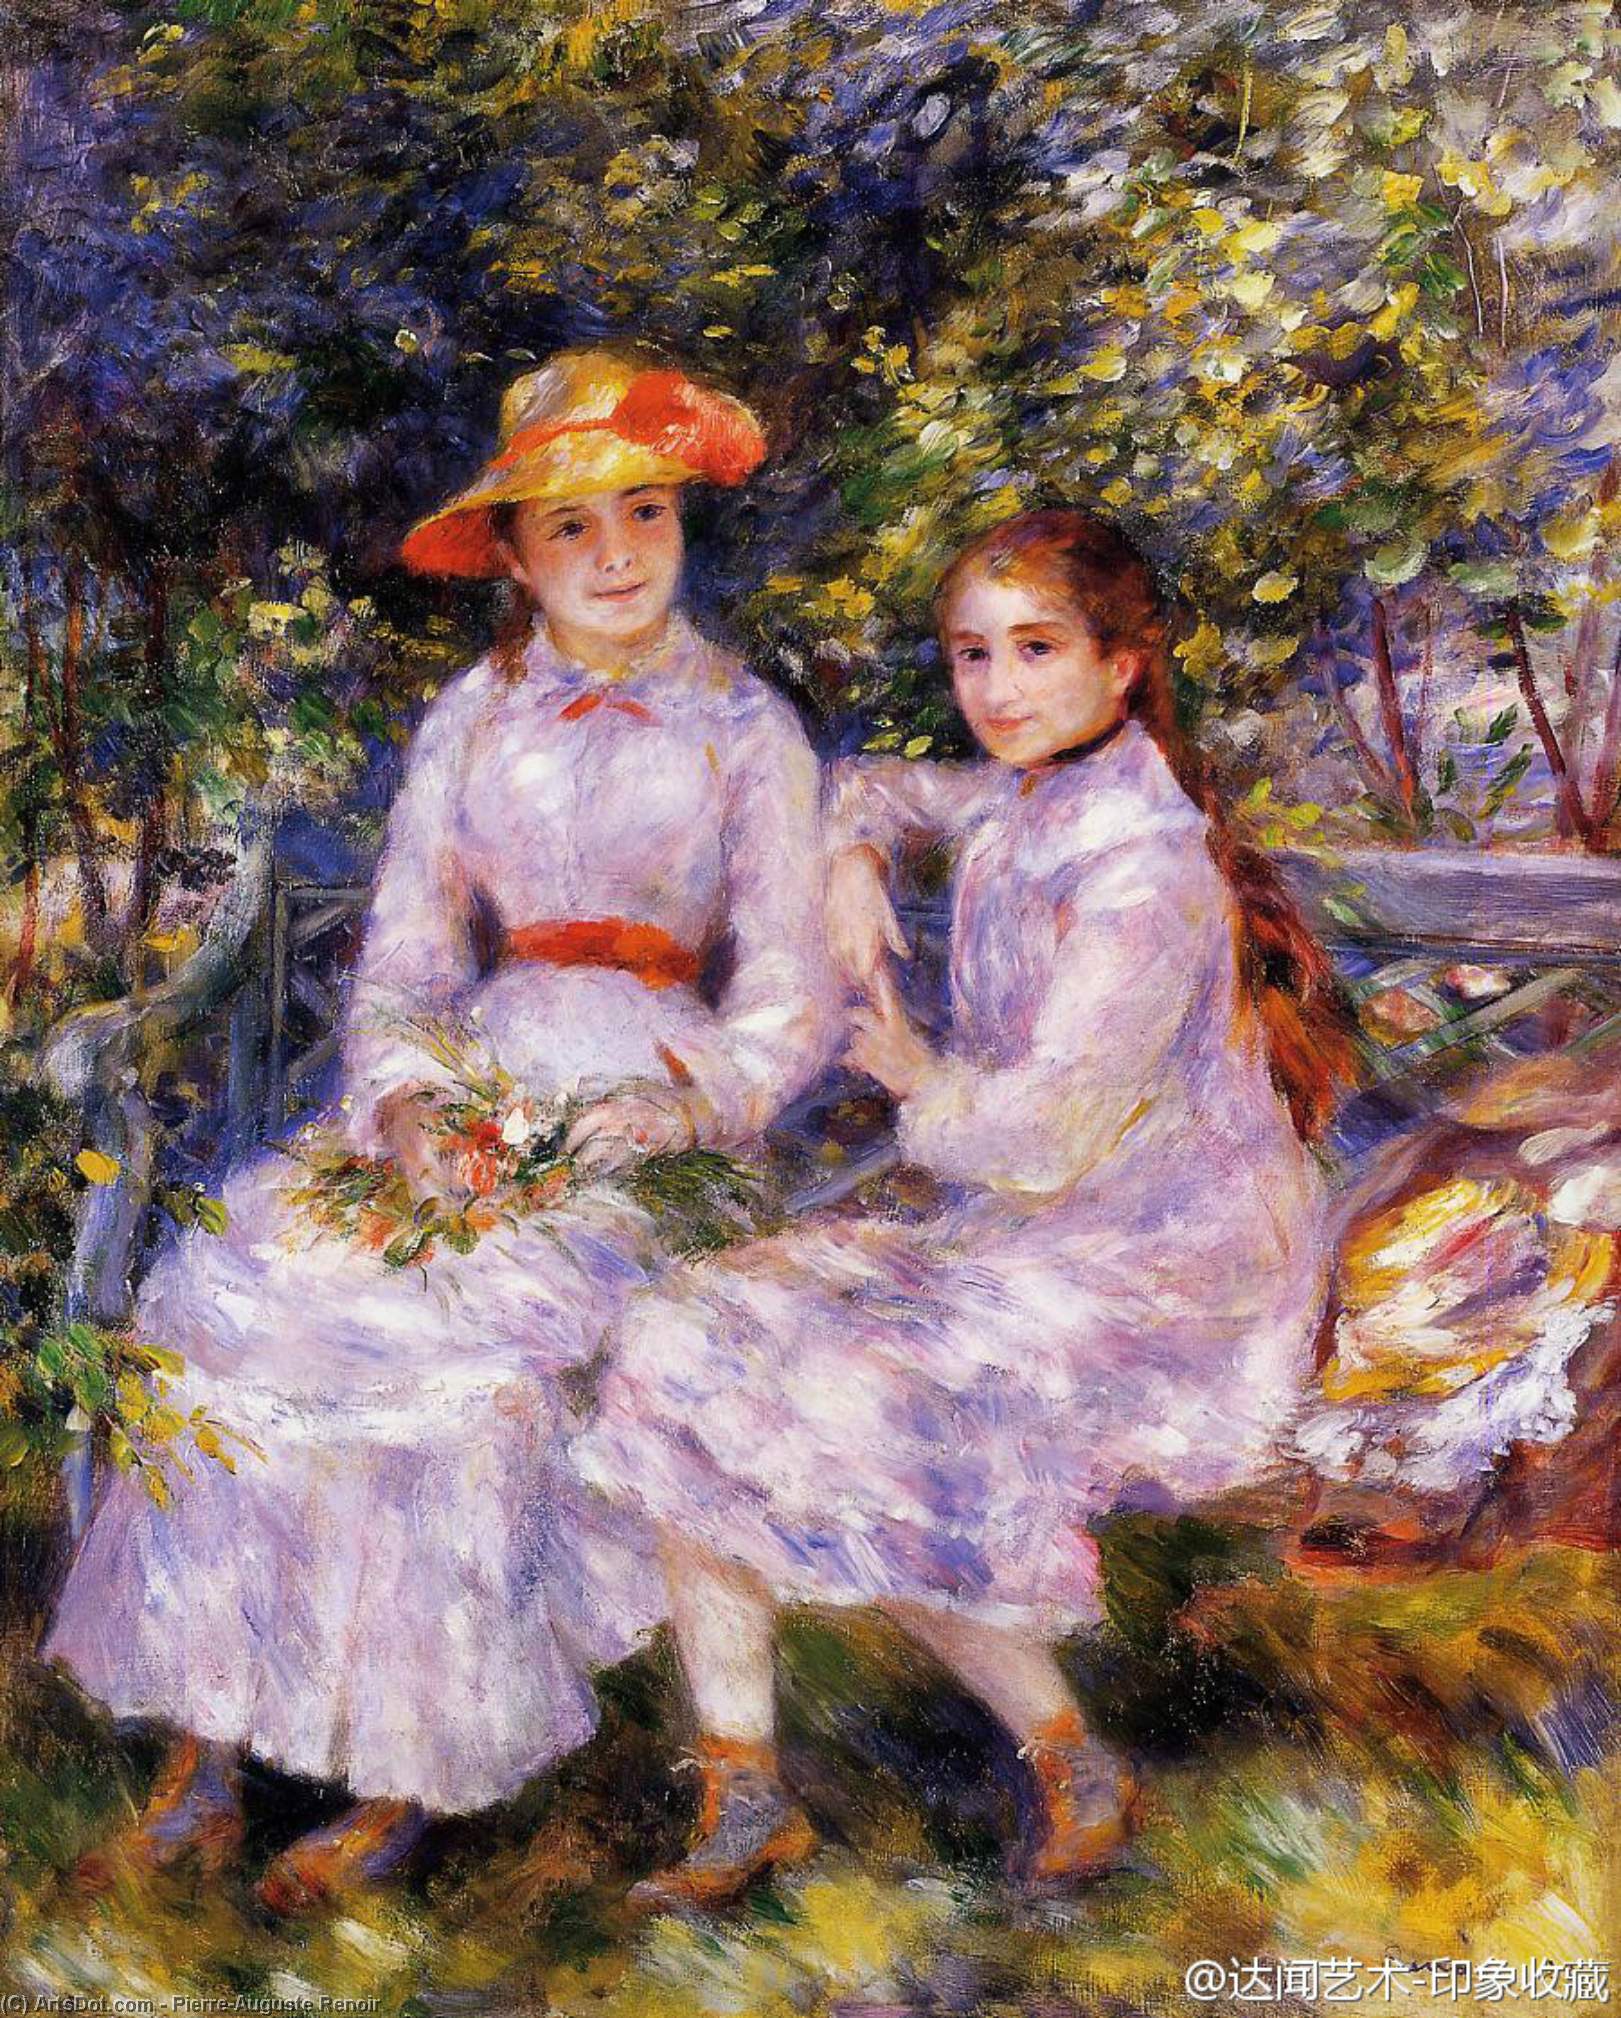 WikiOO.org - 백과 사전 - 회화, 삽화 Pierre-Auguste Renoir - The Daughters of Paul Durand-Ruel (also known as Marie-Theresa and Jeanne)